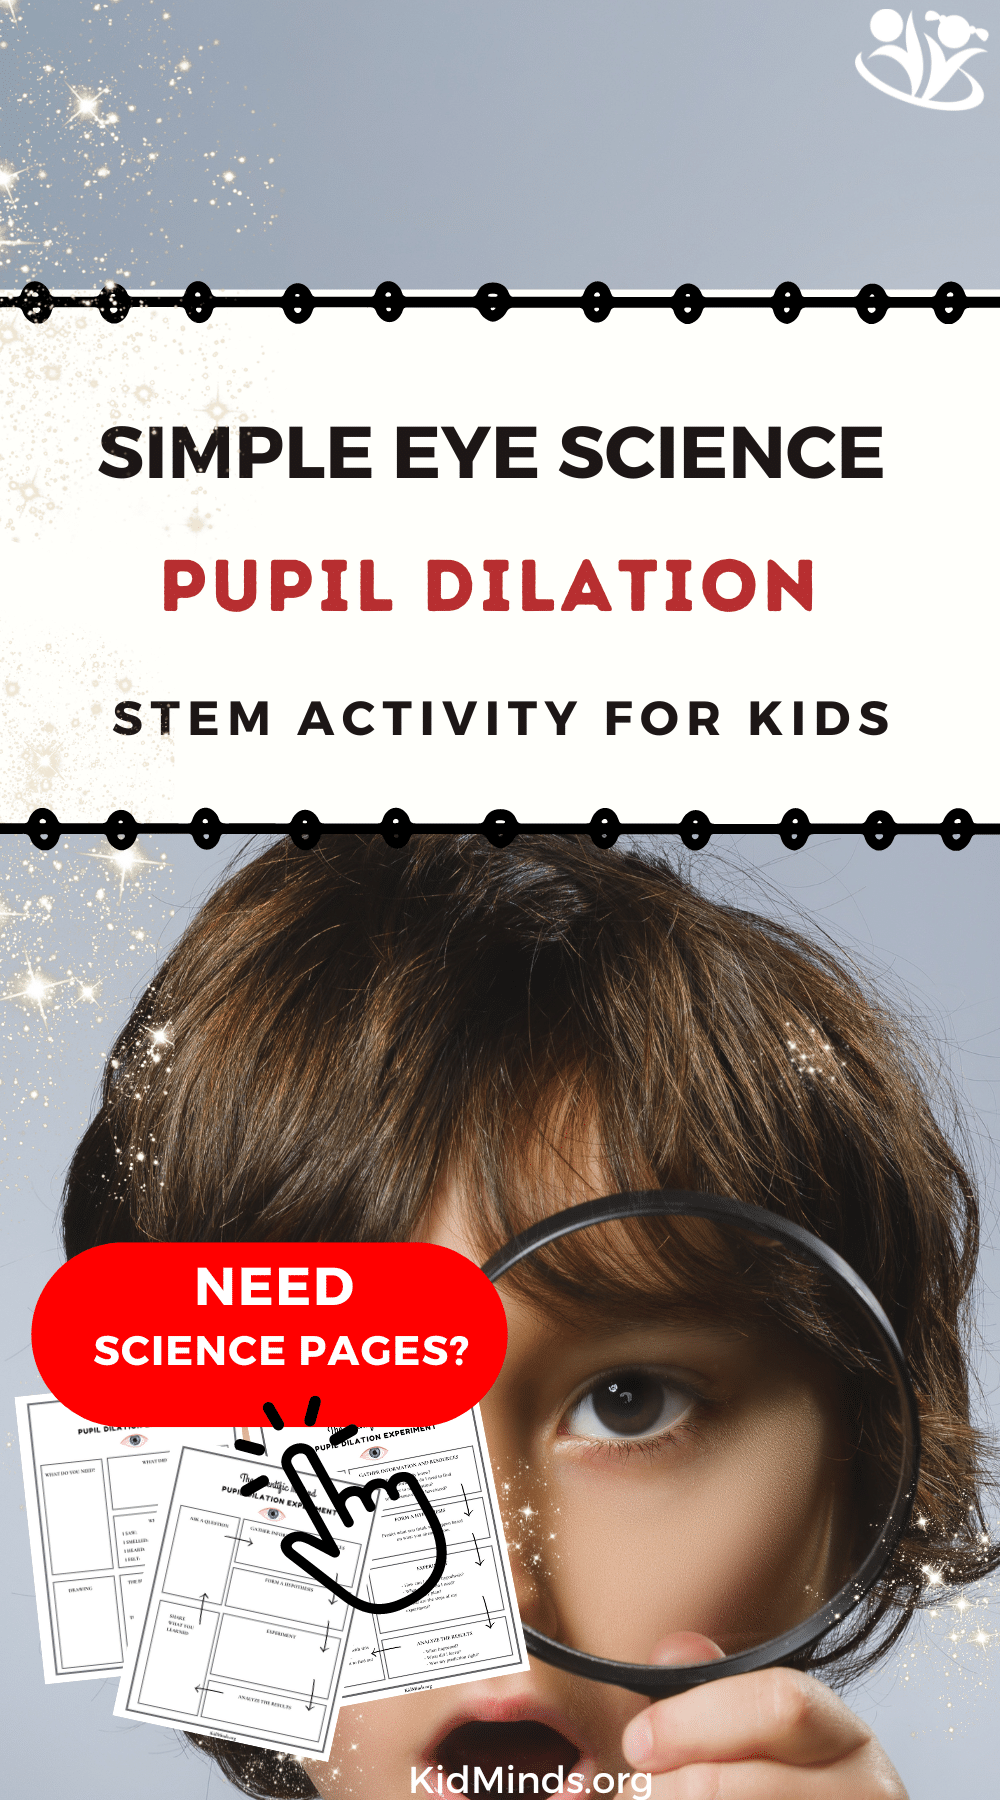 This pupil dilation experiment is a hands-on way to discover how quickly our eyes adjust to a variety of light conditions. (+ STEM downloads) #kidsactivities #STEM #laughingkidslearn #scienceforkids #easyscience